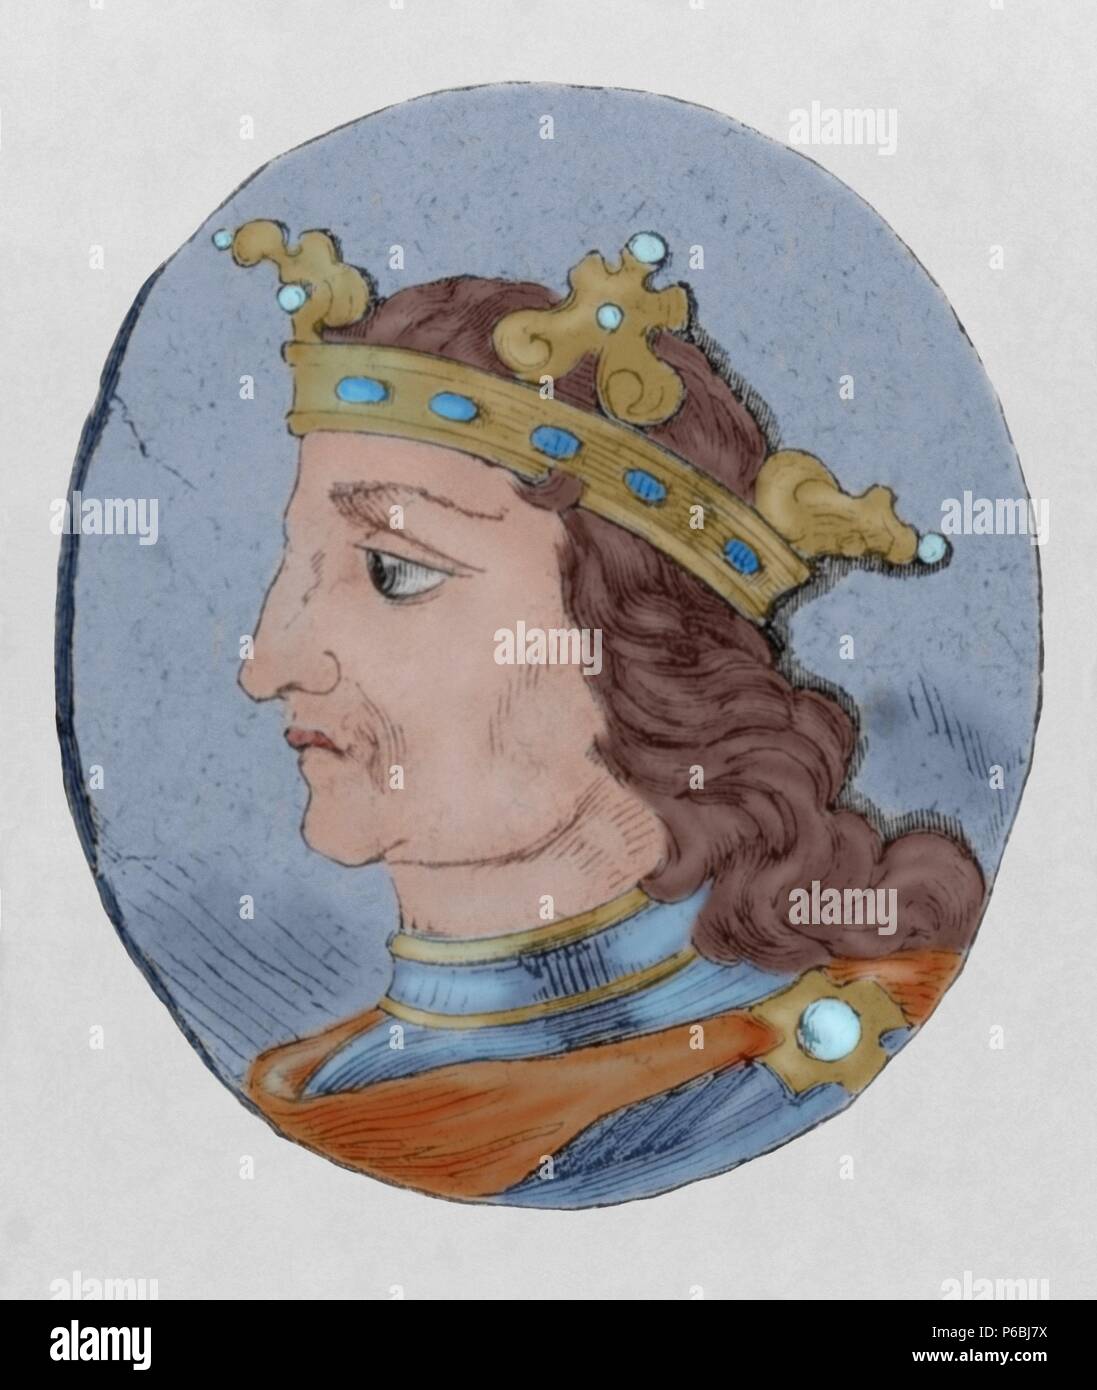 Ordono III of Leon (926-956). King of Leon from 951-956. Engraving. Colored. Stock Photo